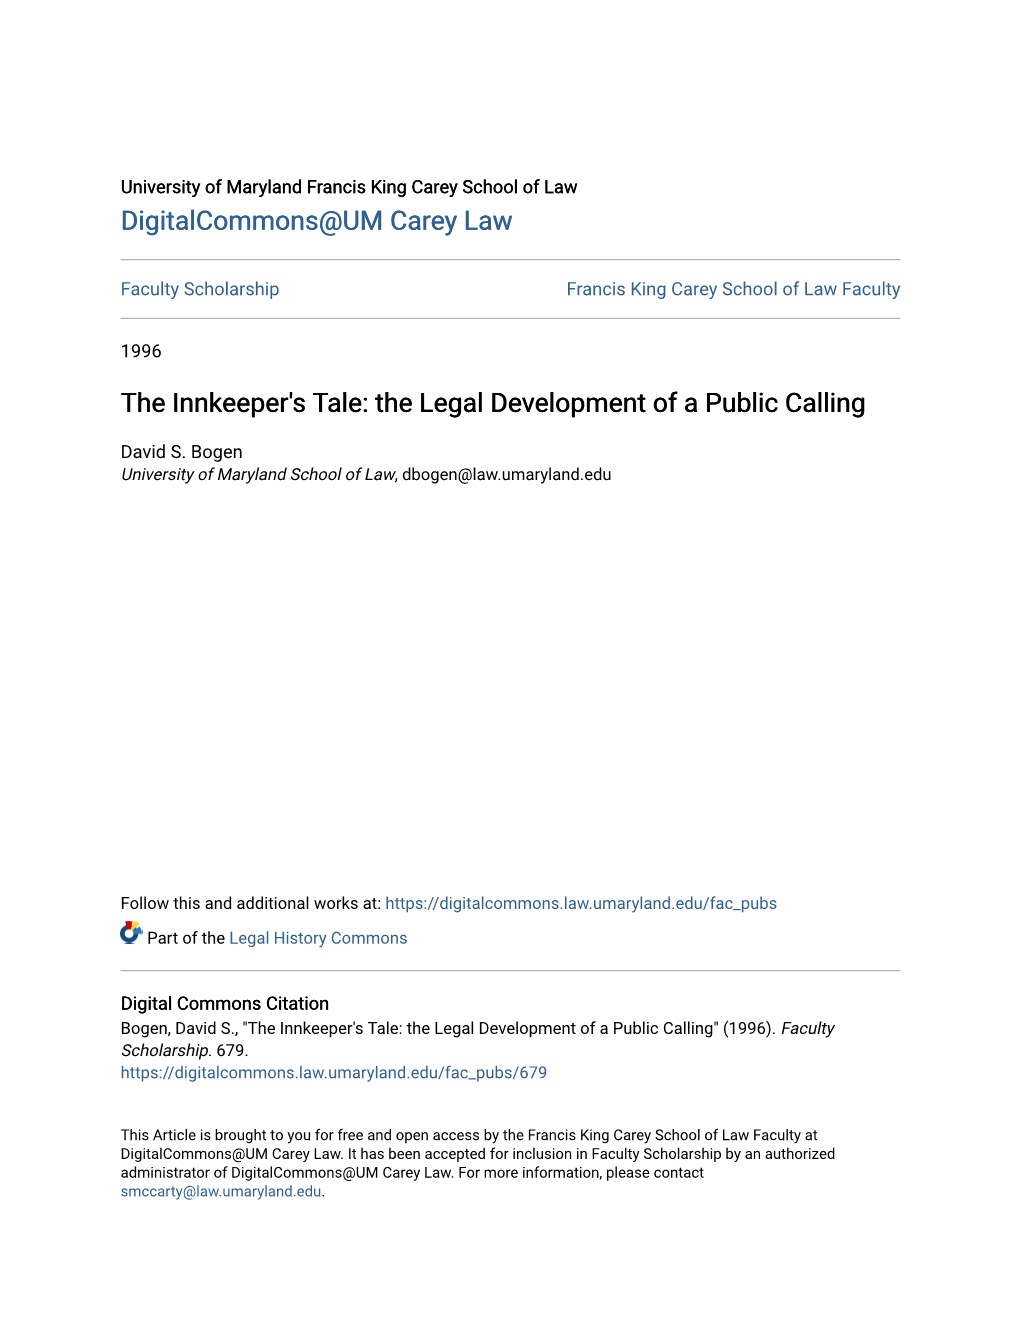 The Innkeeper's Tale: the Legal Development of a Public Calling